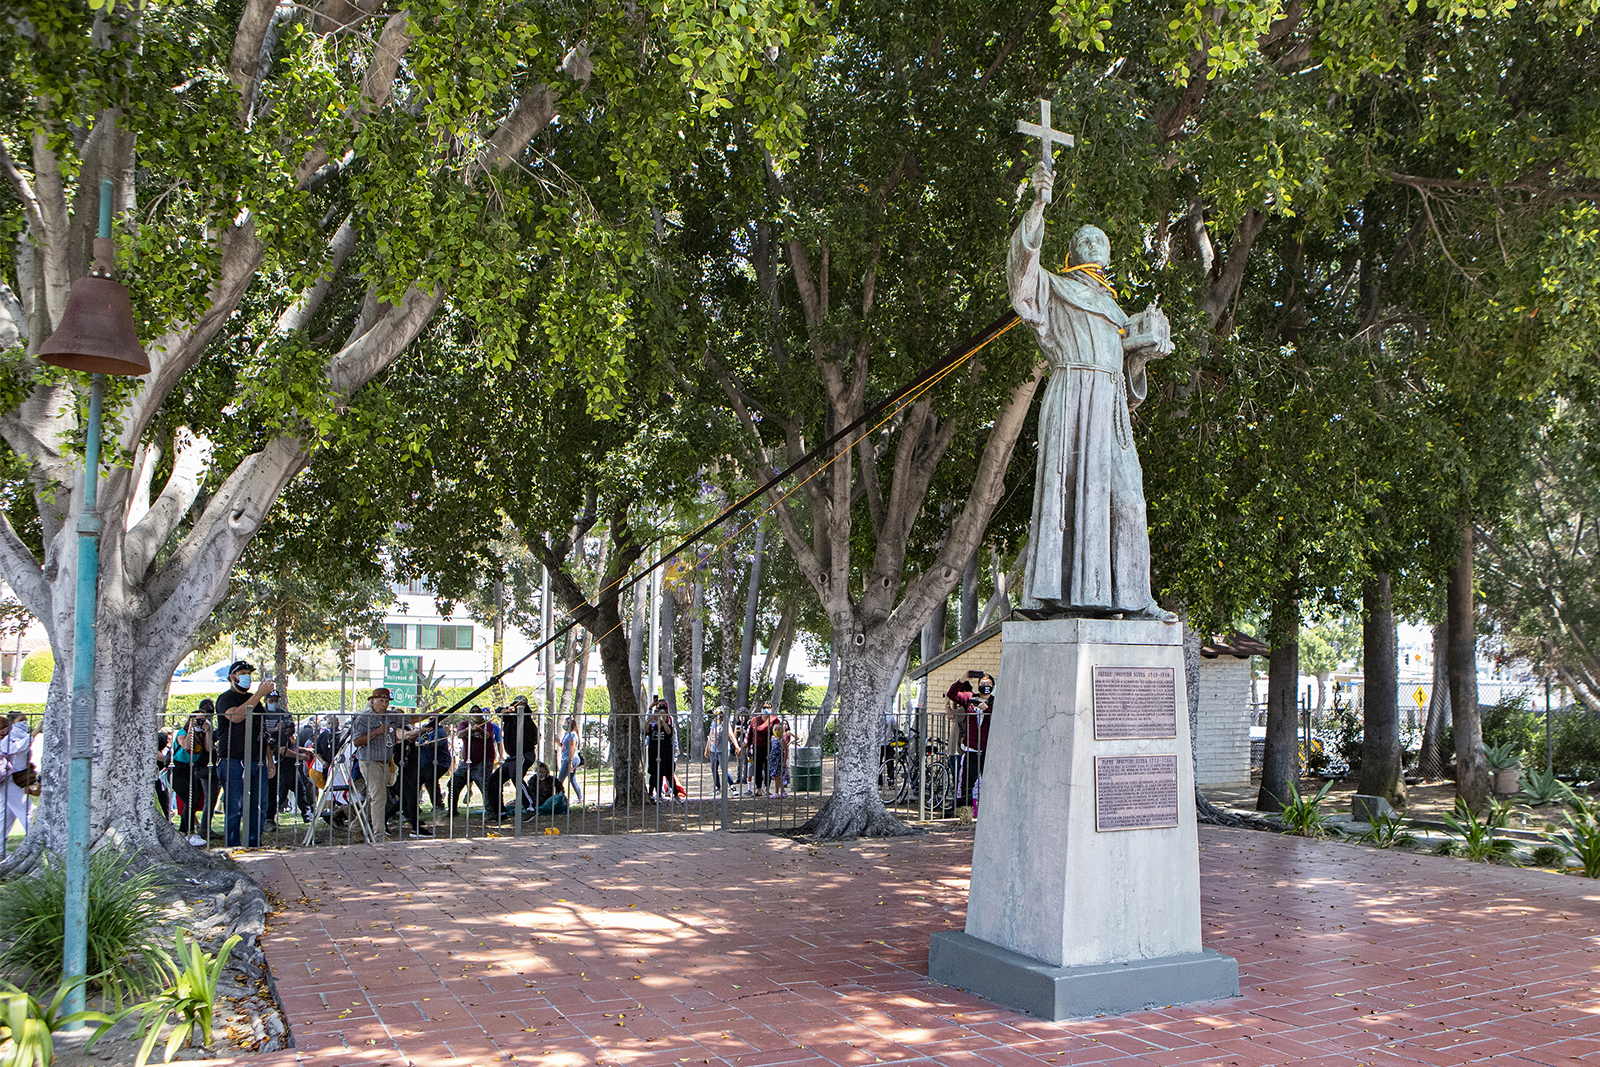 Demonstrators prepare to pull down a Junipero Serra statue on June 20, 2020, in downtown Los Angeles at Father Serra Park. Photo by Erick Iñiguez